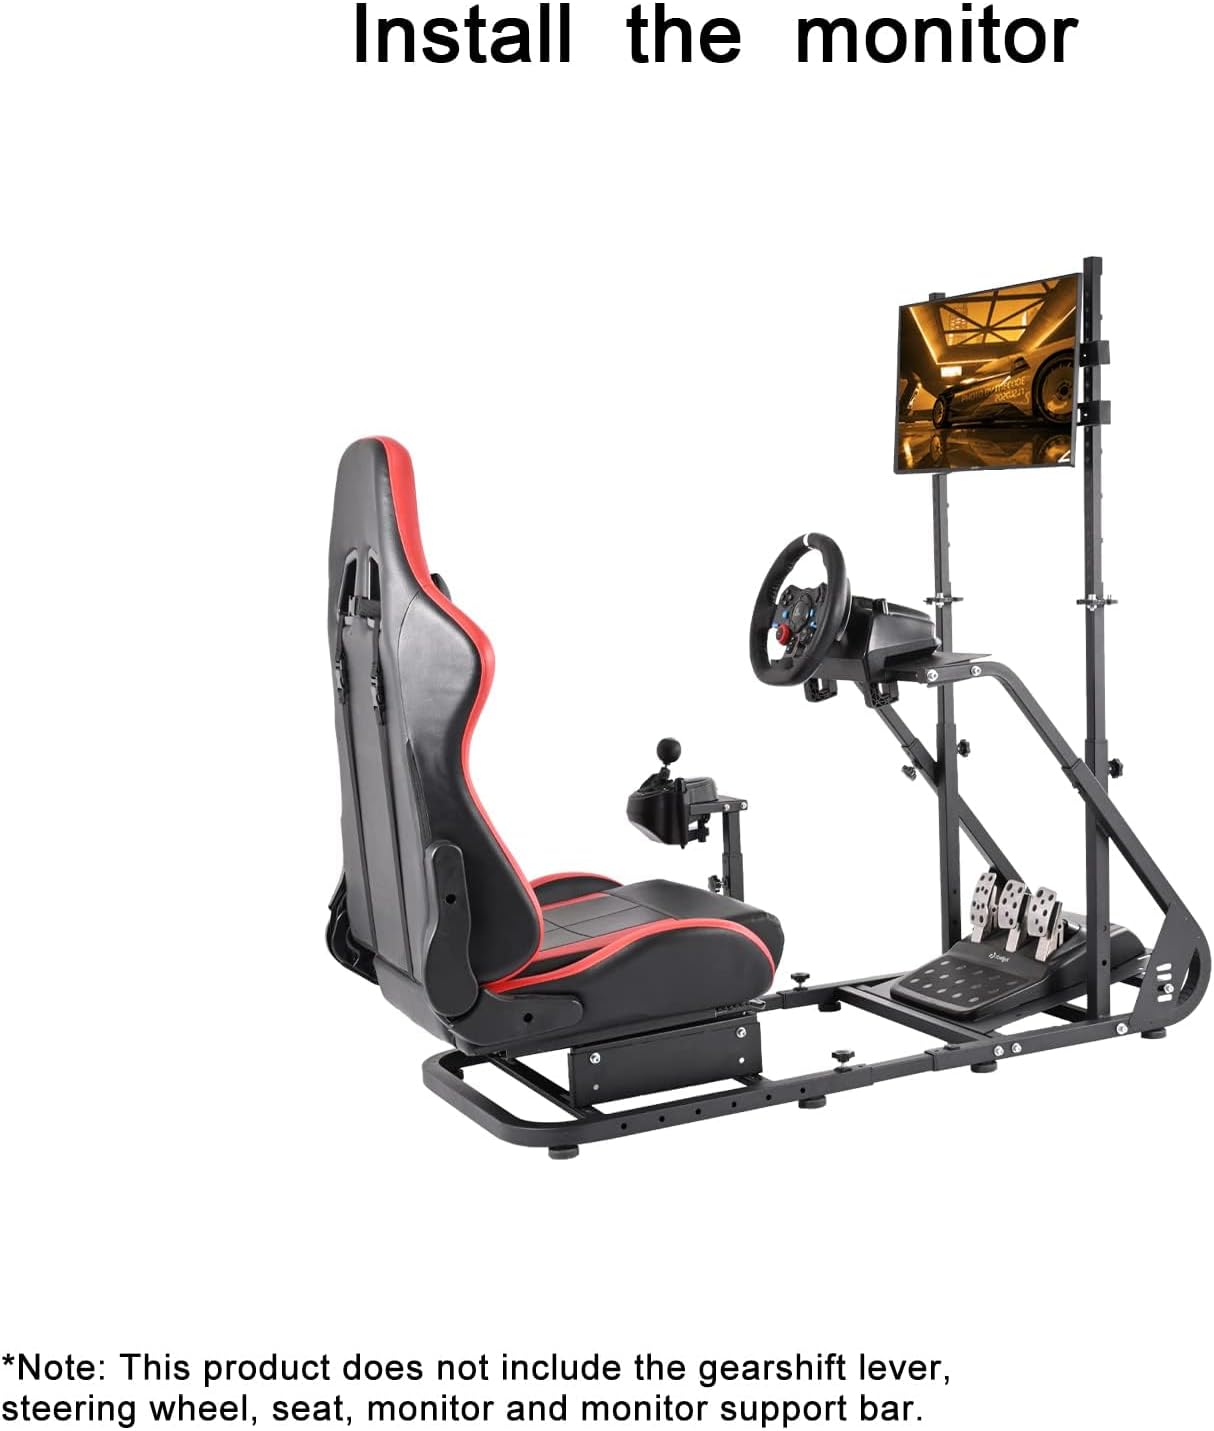 Mokapit Display Support Racing Steering Wheel Cockpit Compatible with Logitech/Thrustmaster/PXN/Fanatec G923,G29,T500RS,TX,T248 Stable TV Stand Steering Wheel& Shifter & Pedal Not Included